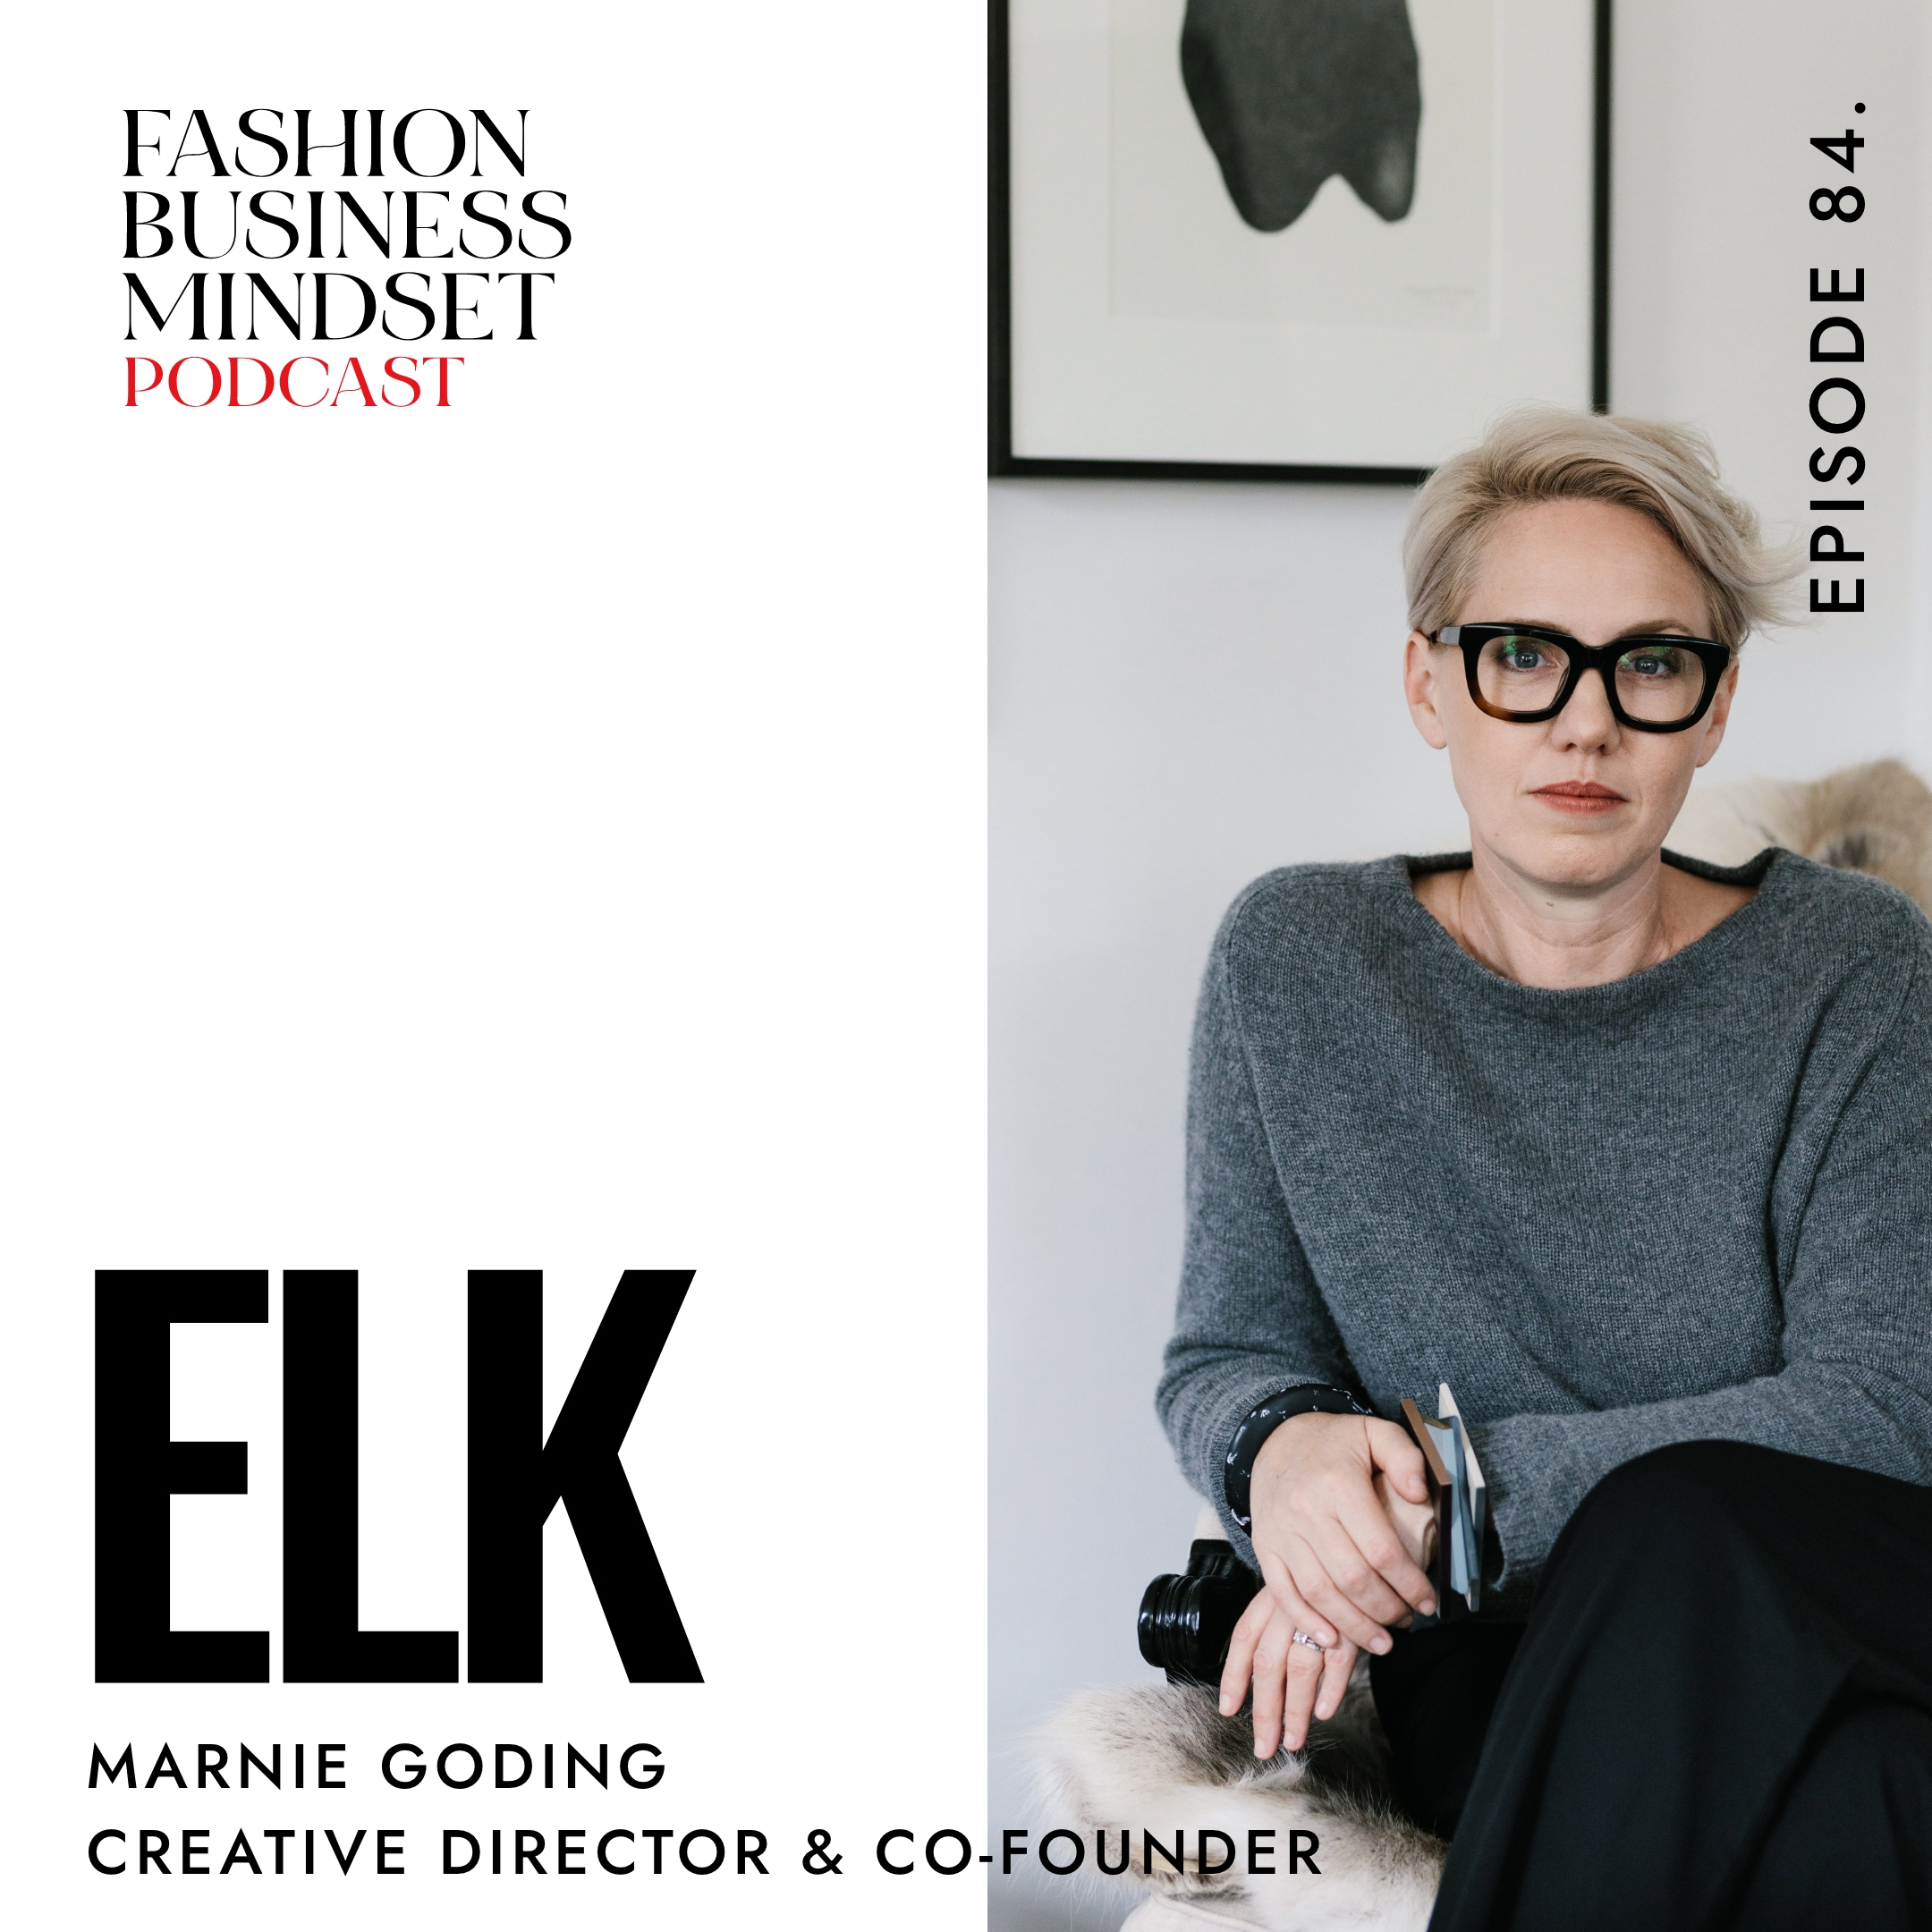 Marnie Goding | Brand Director and Co-Founder of ELK |  Two Decades of Conscious Fashion